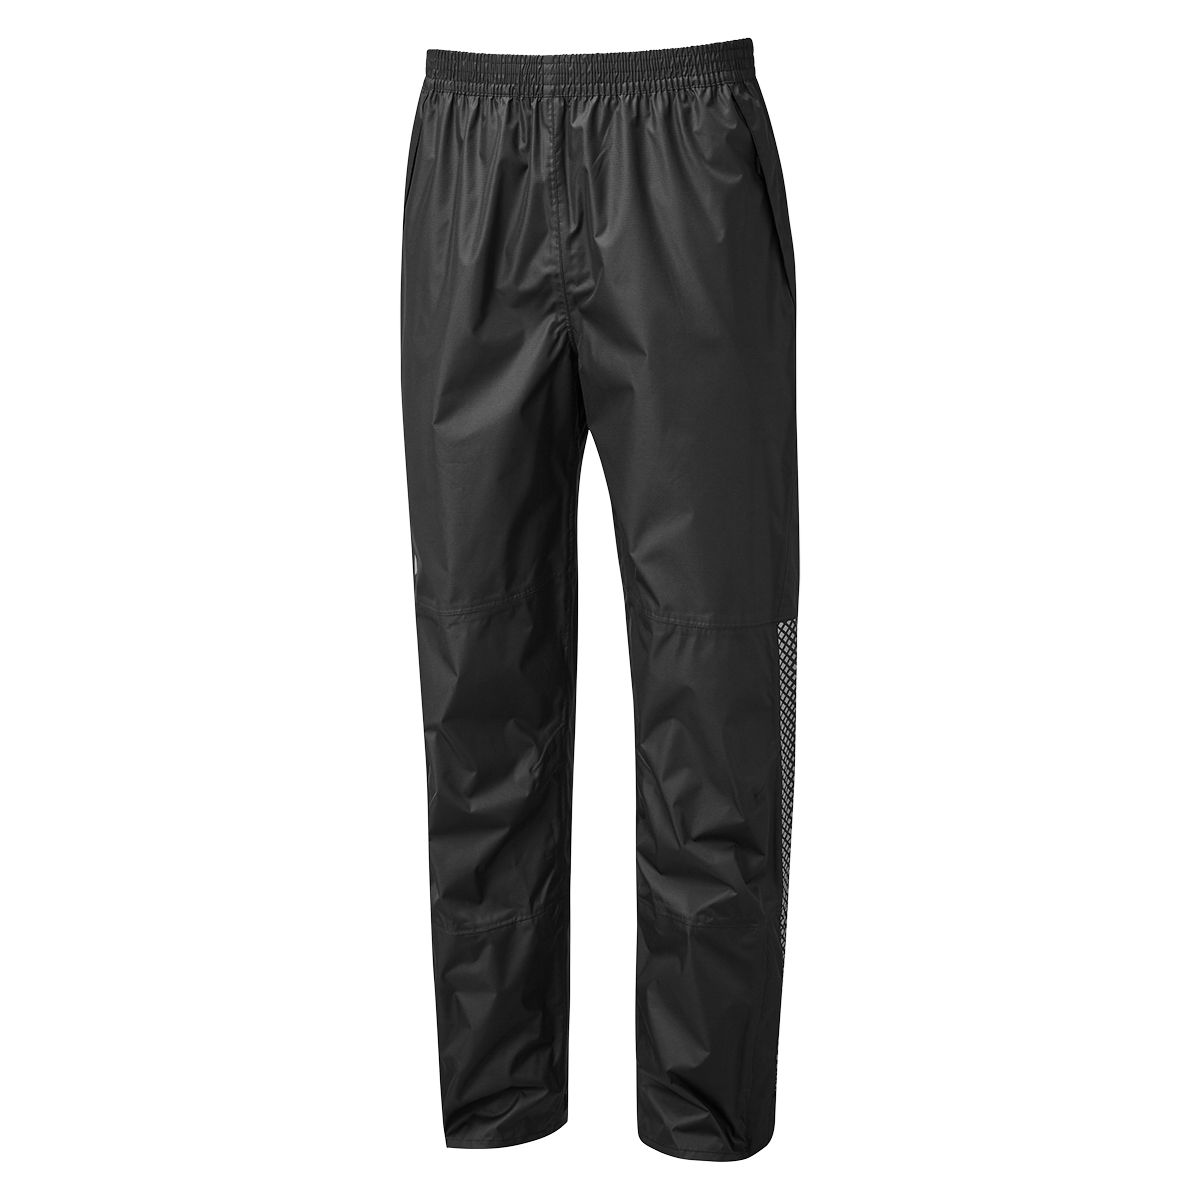 Altura Nightvision Waterproof Overtrousers - £53.6 | Shorts, Tights and ...